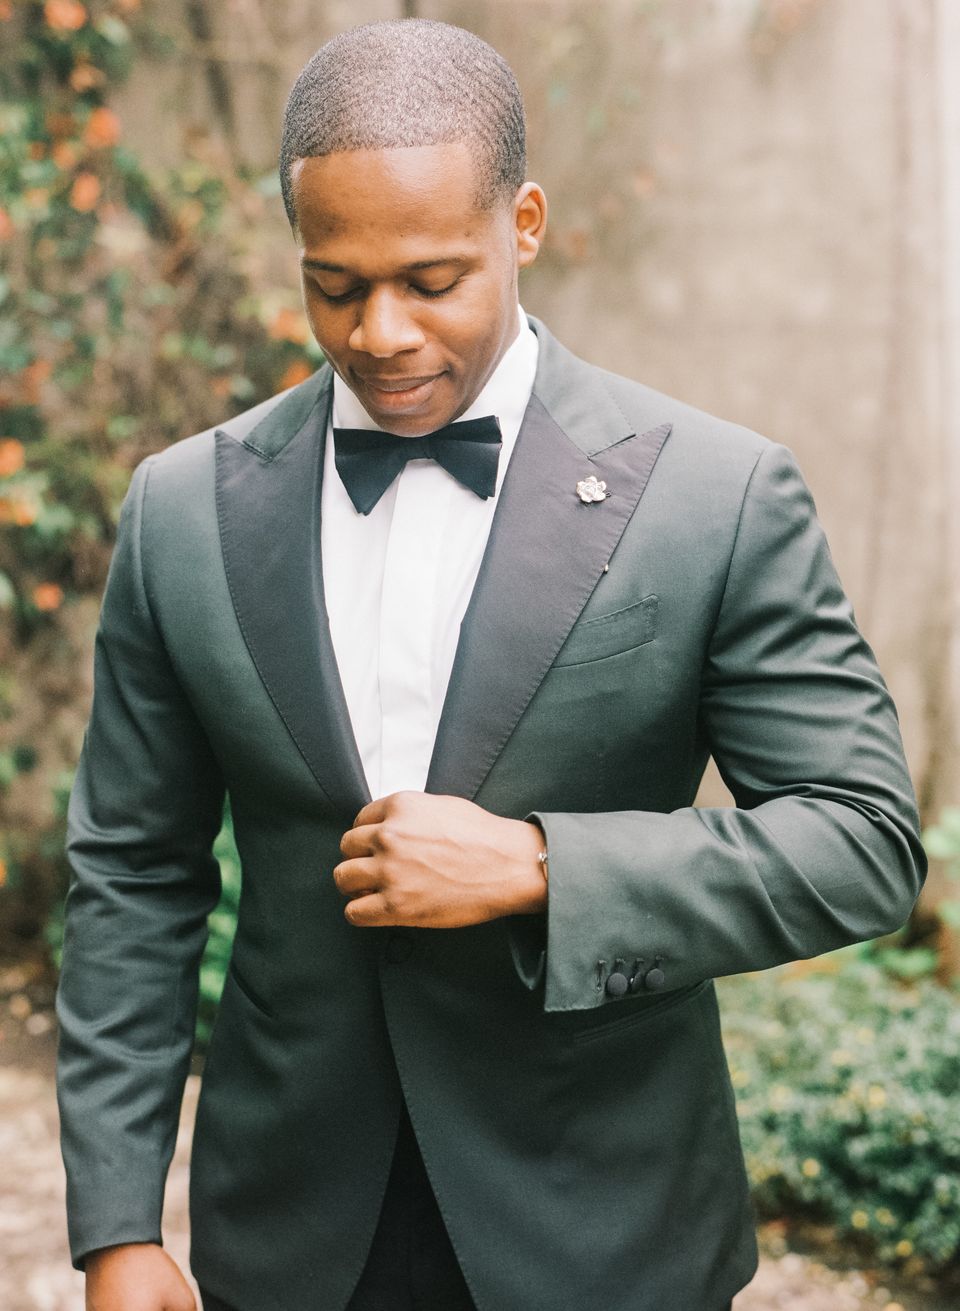 19 Dapper Grooms Who Rocked Some Colorful Wedding Attire | HuffPost Life